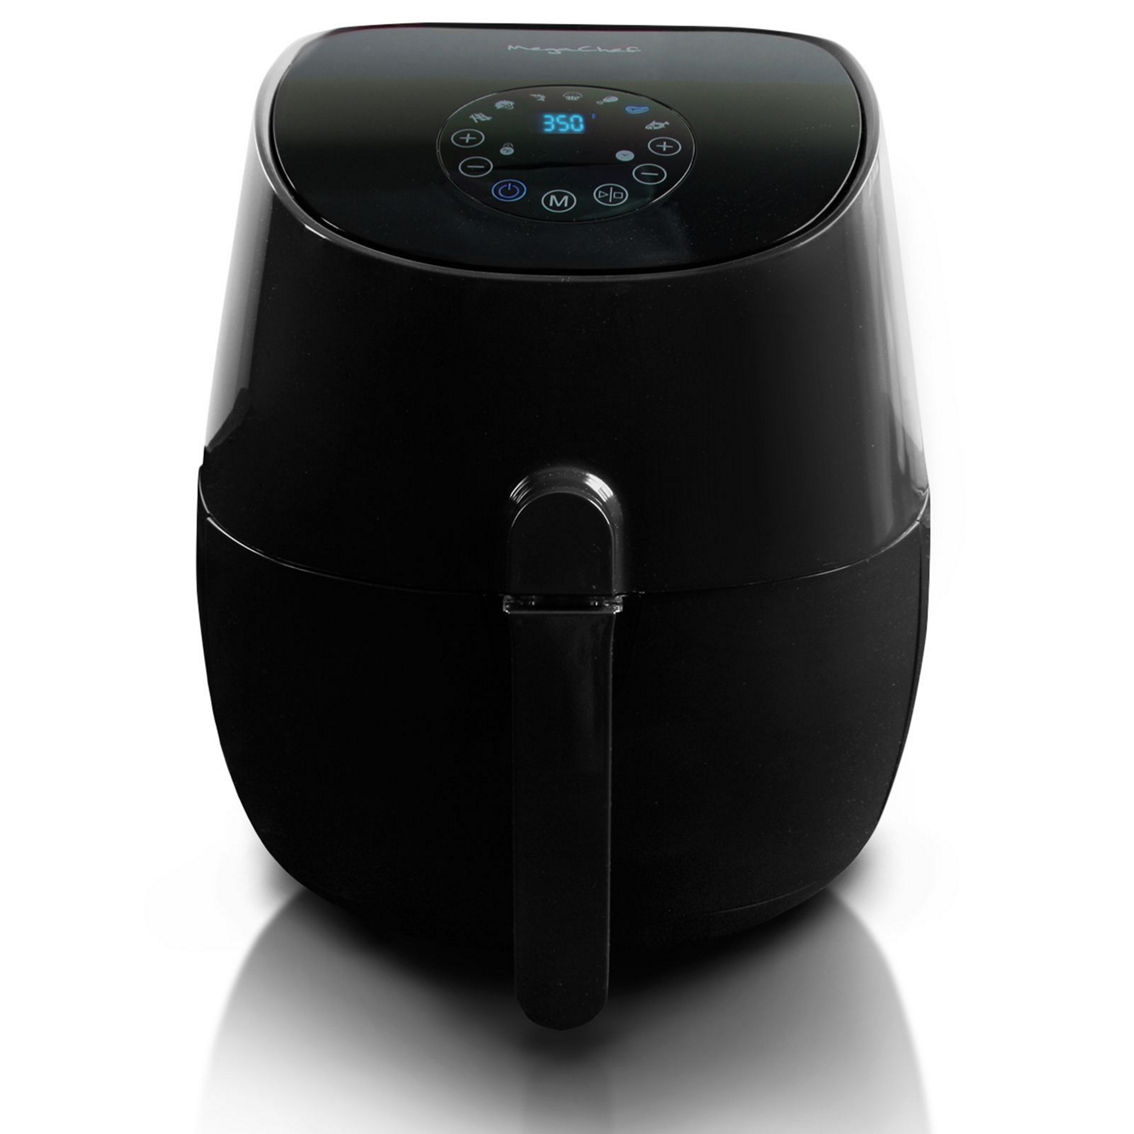 MegaChef 3.5 Quart Airfryer And Multicooker With 7 Pre-programmed Settings in Sl - Image 5 of 5